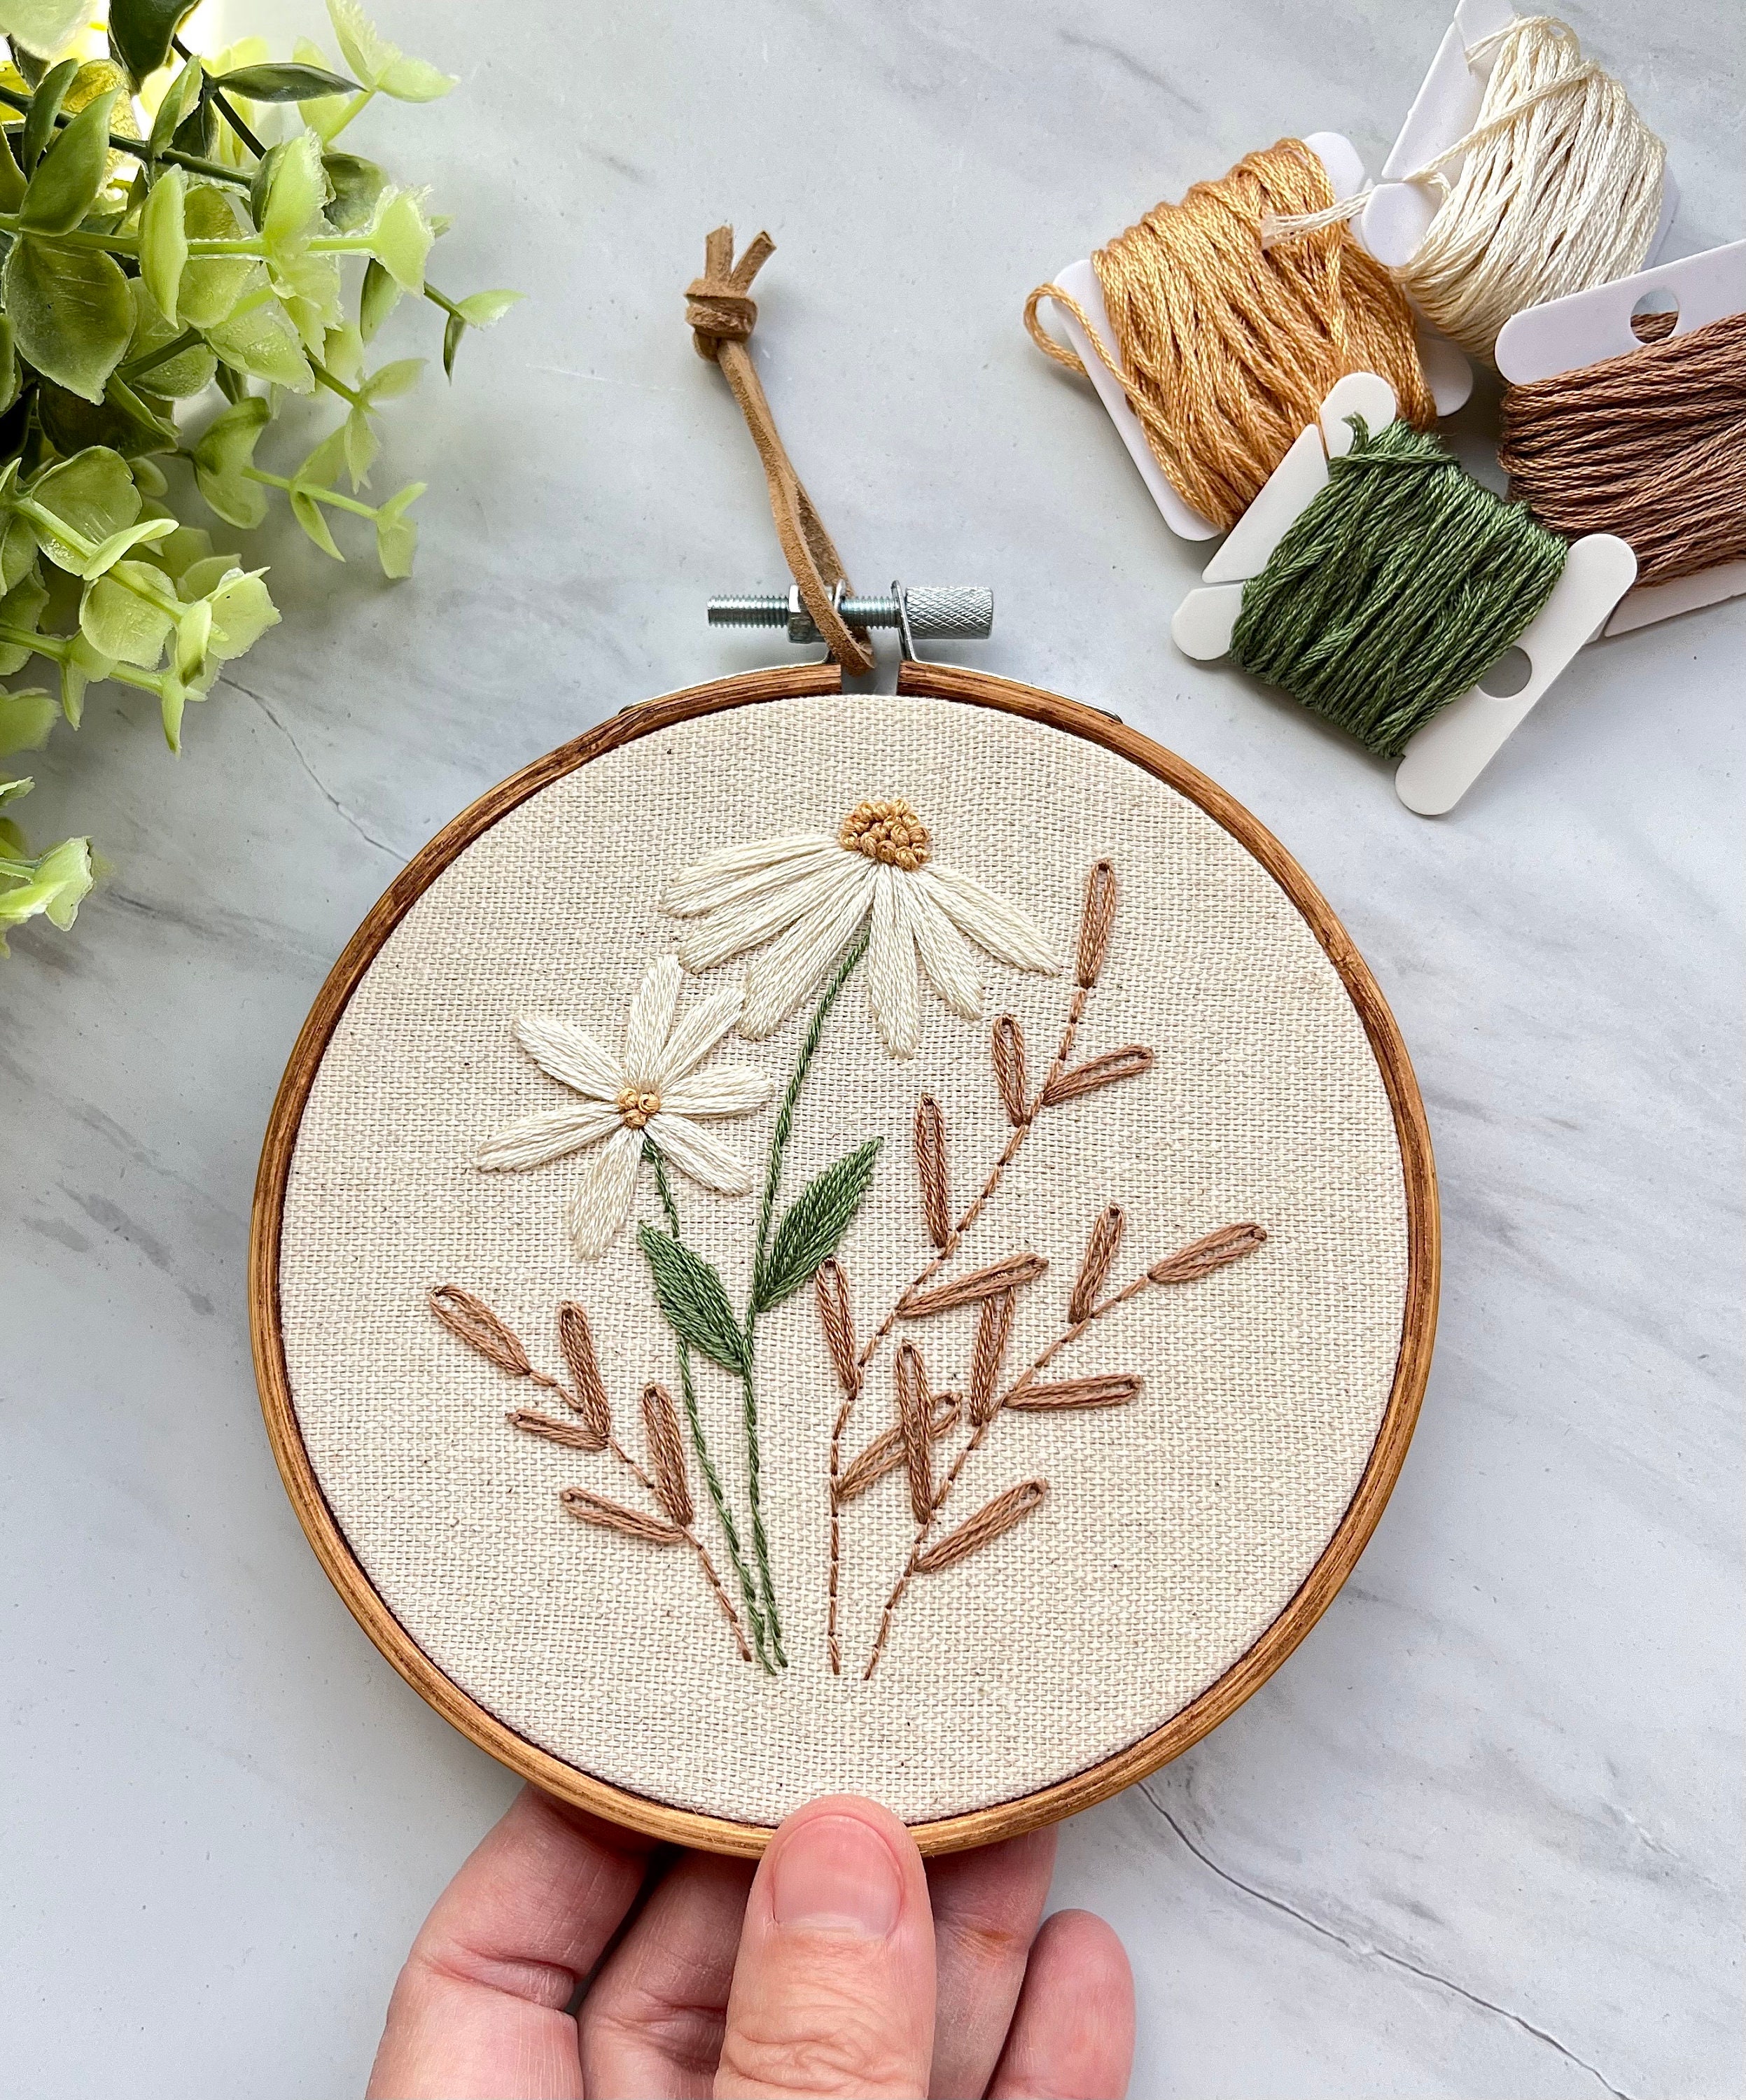 Embroidery Set for Beginners, Modern Floral Embroidery Kit